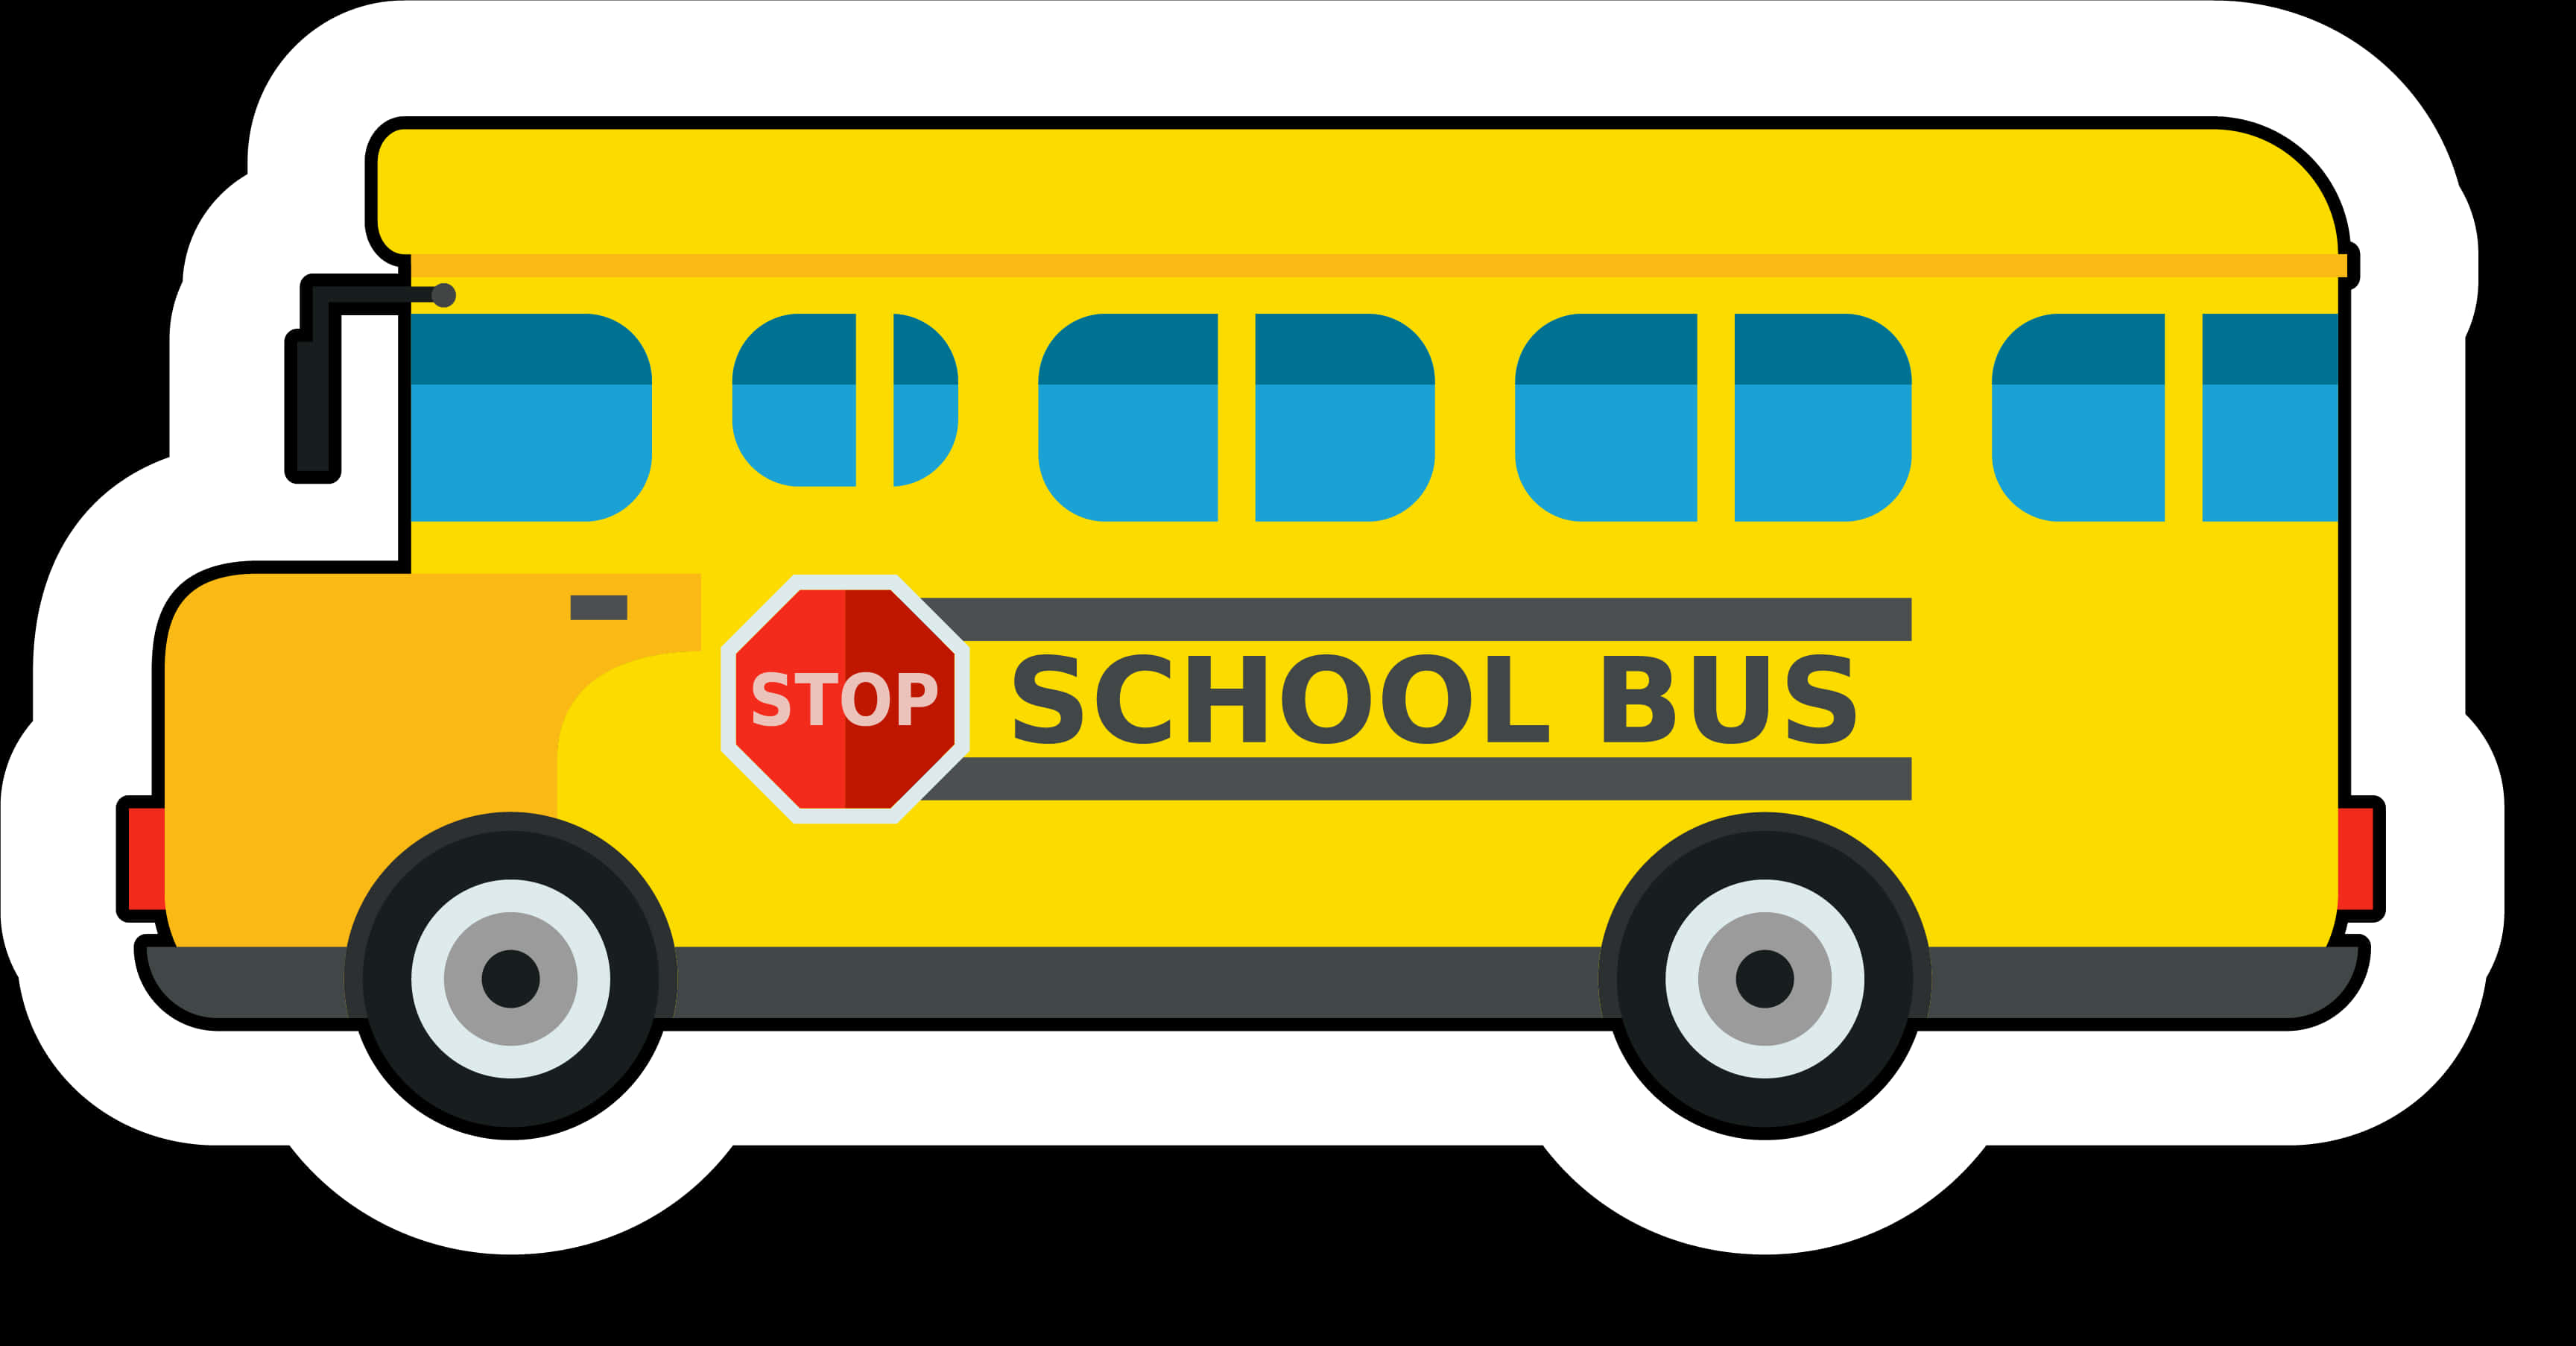 A Yellow School Bus With A Stop Sign